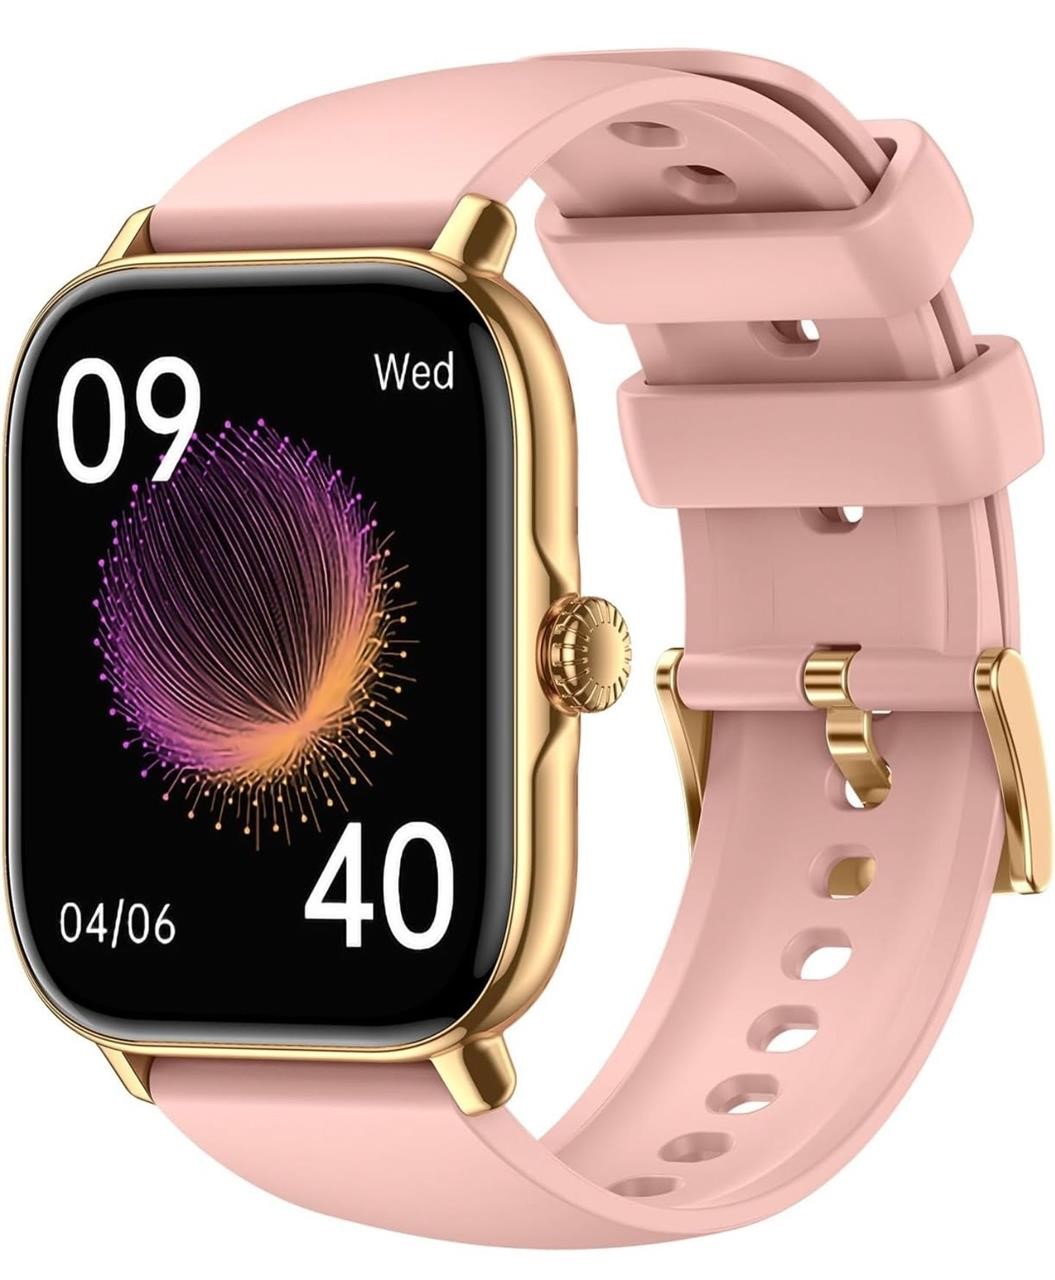 ($70) Smart Watch for Women (Answer/Dial Cal